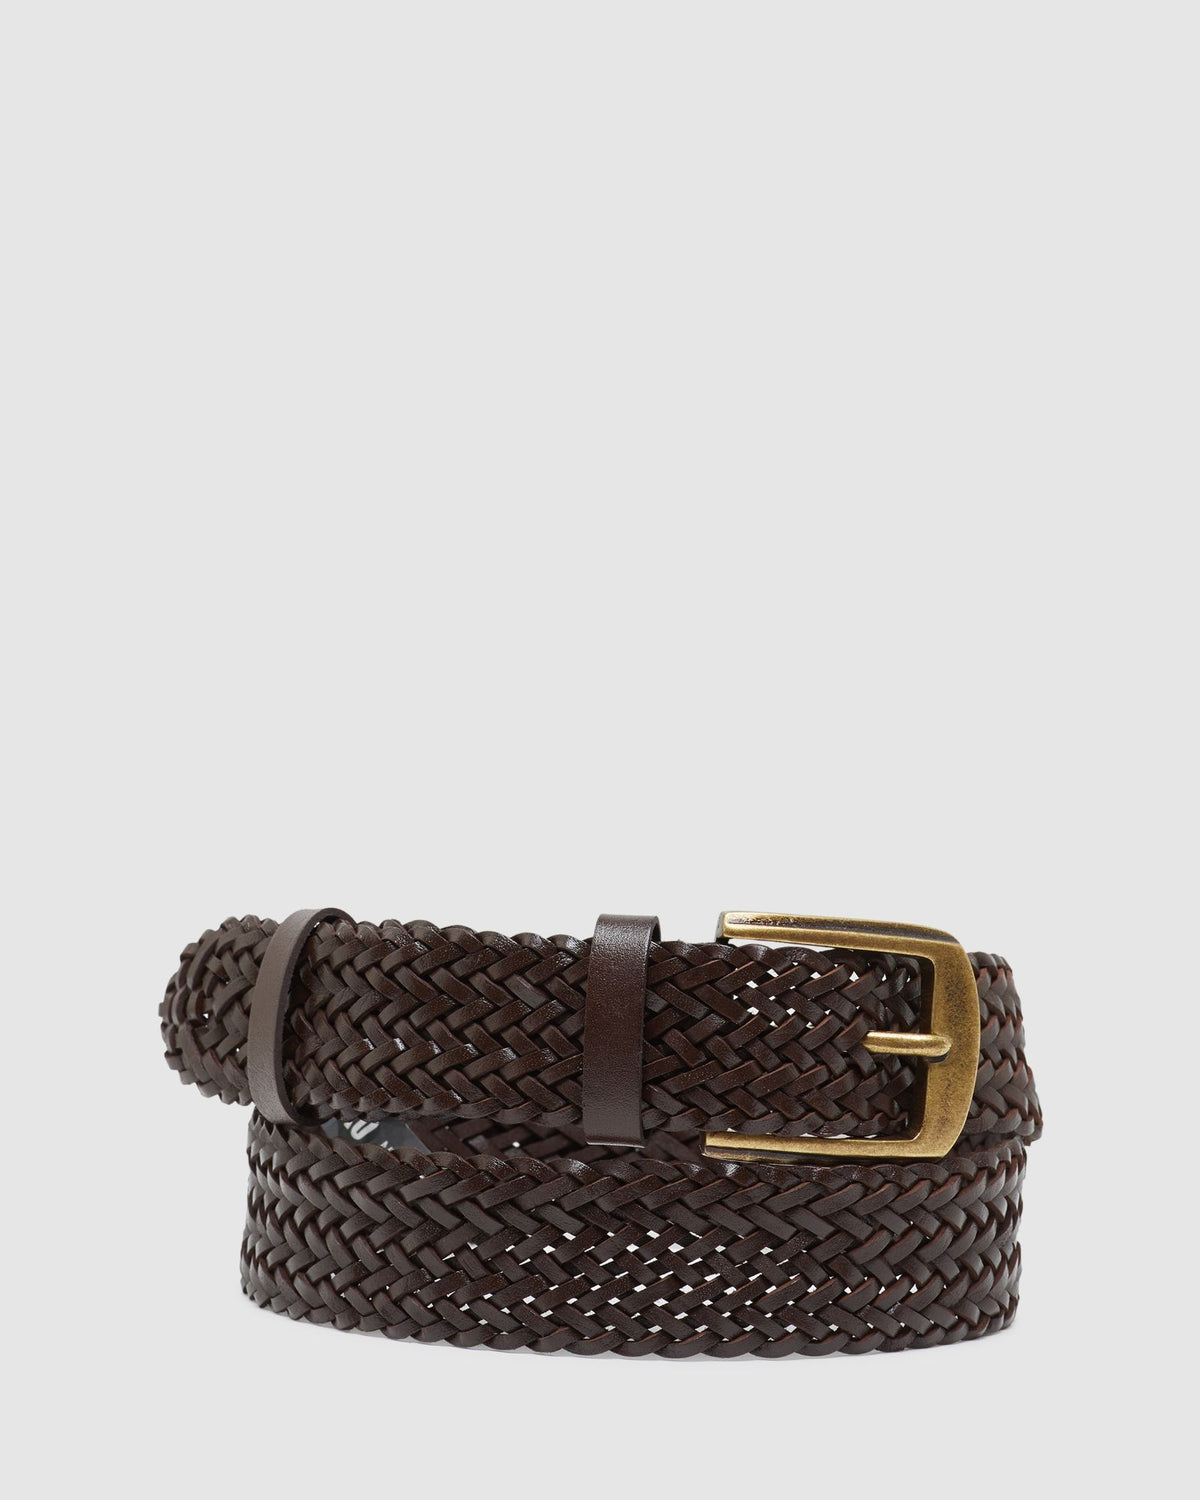 LINCOLN LEATHER WOVEN WAIST BELT MENS ACCESSORIES